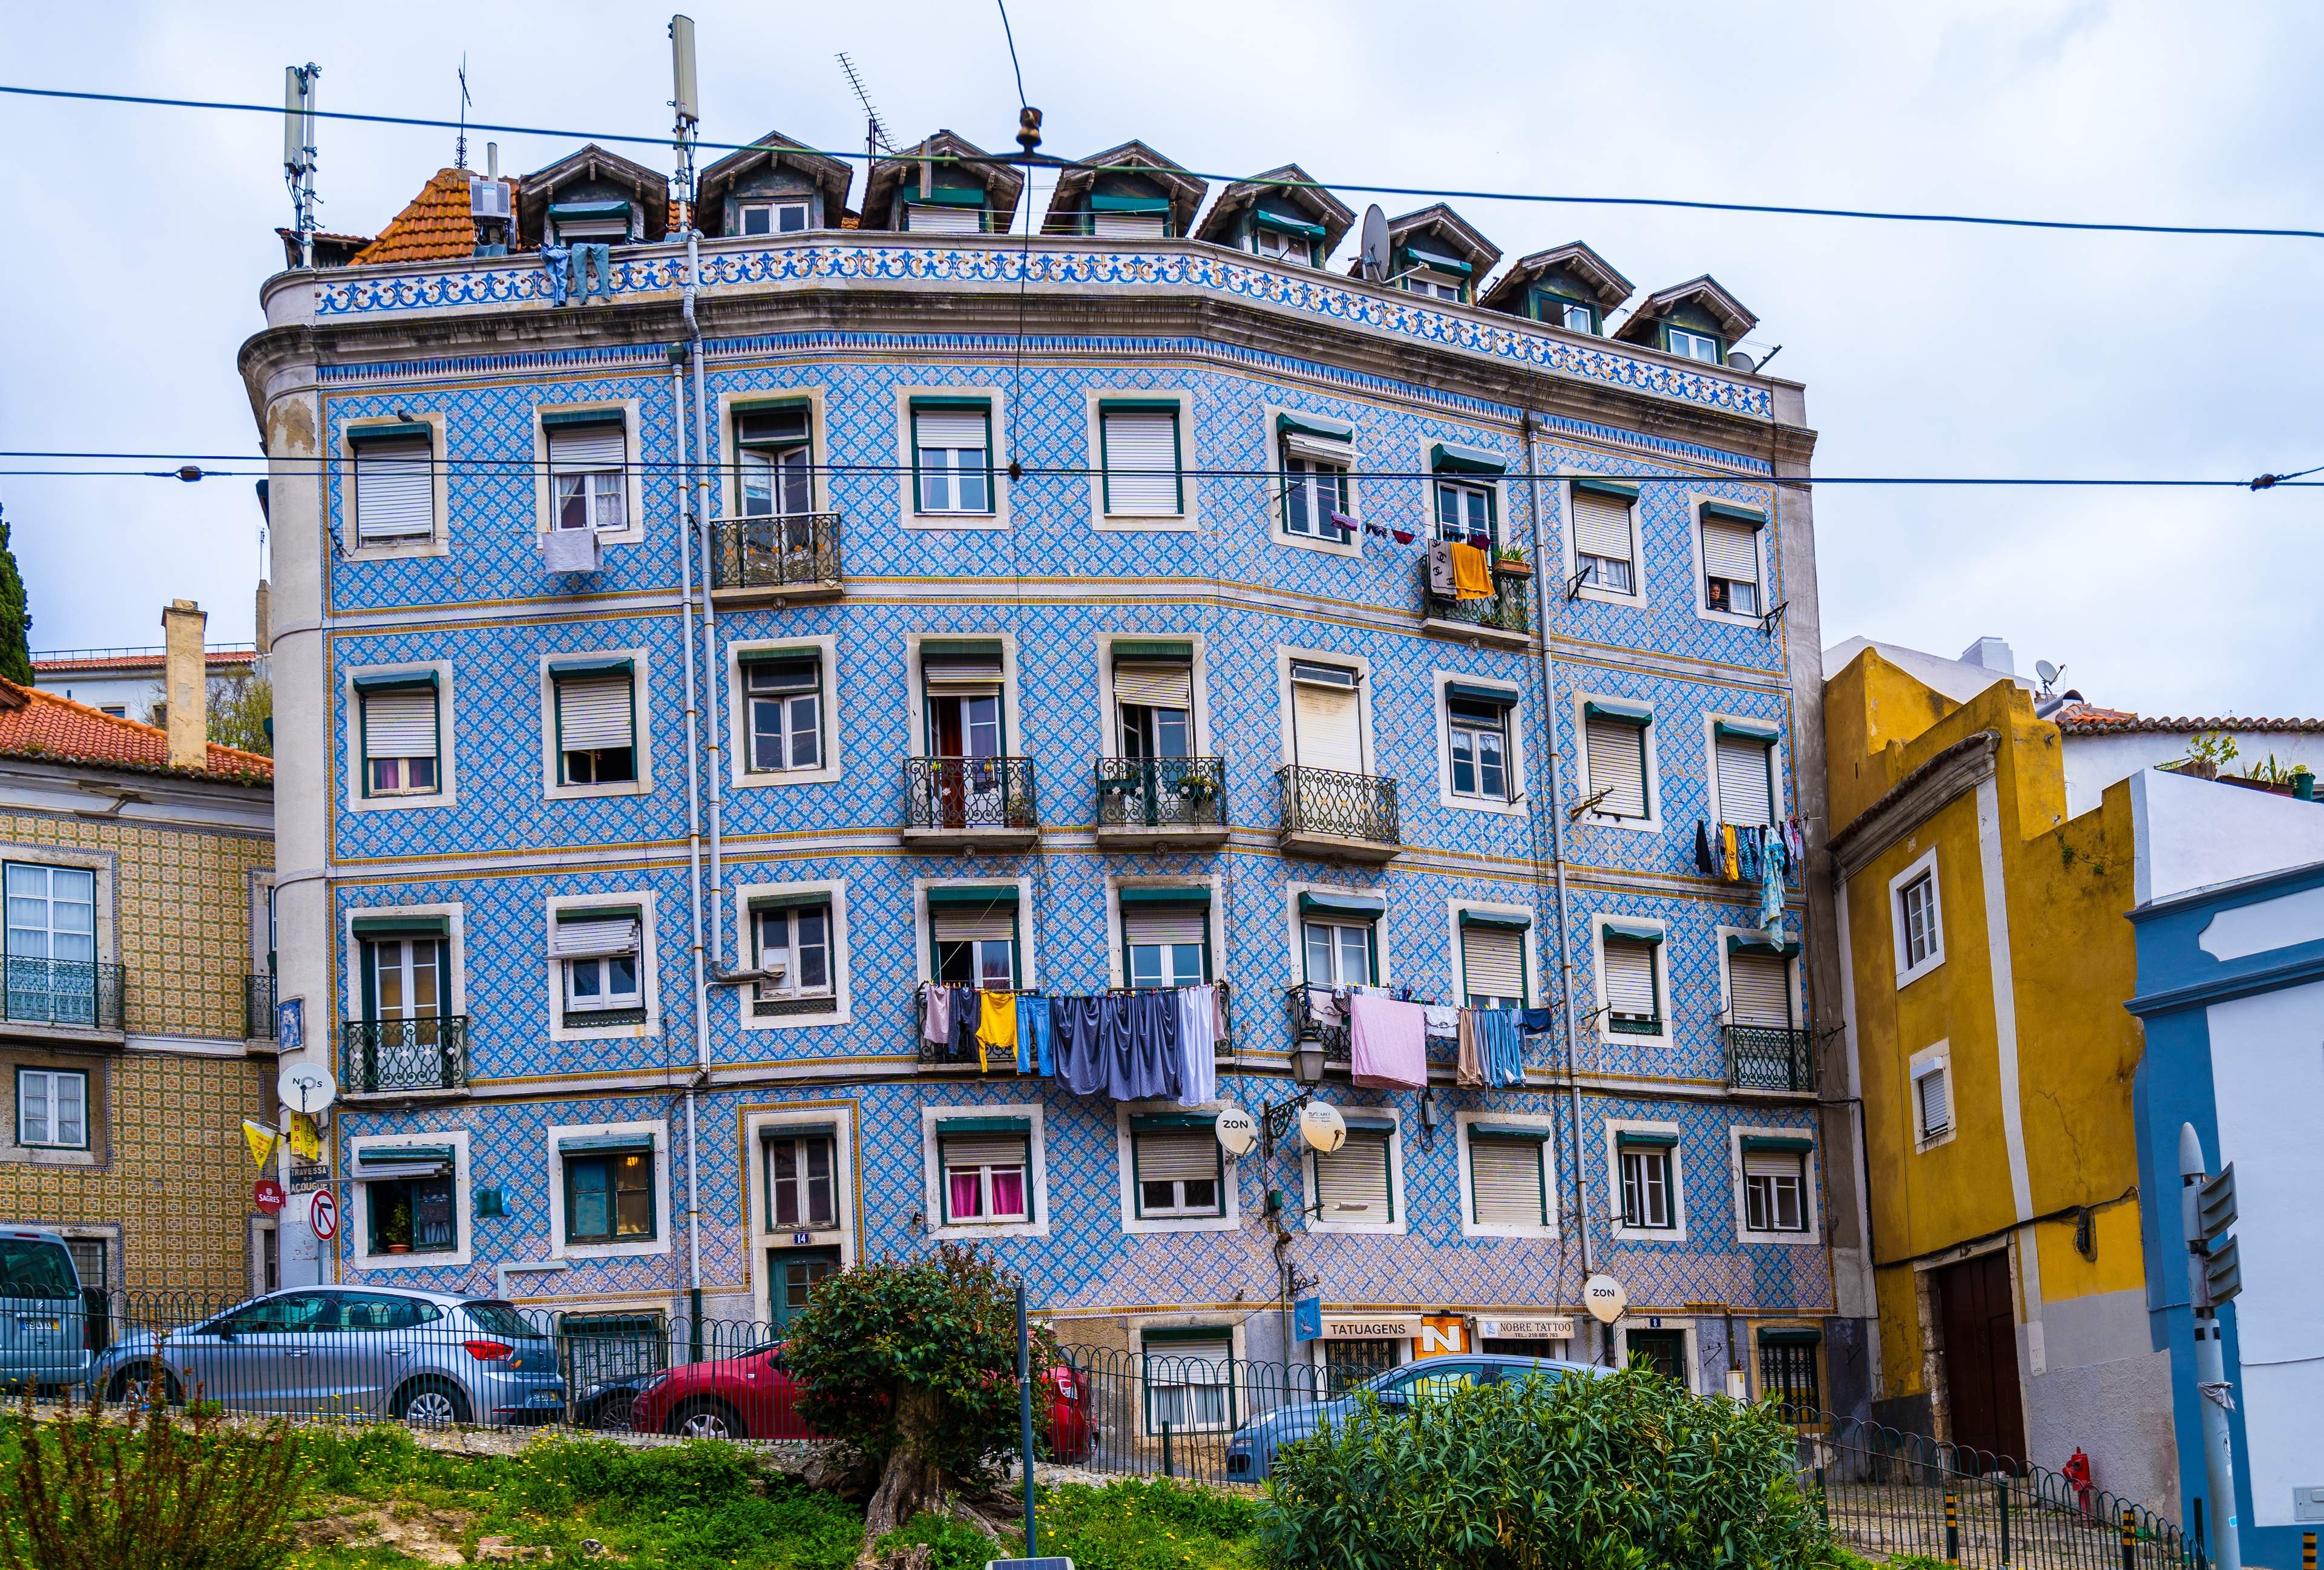 A colorful building in Lisbon, Portugal